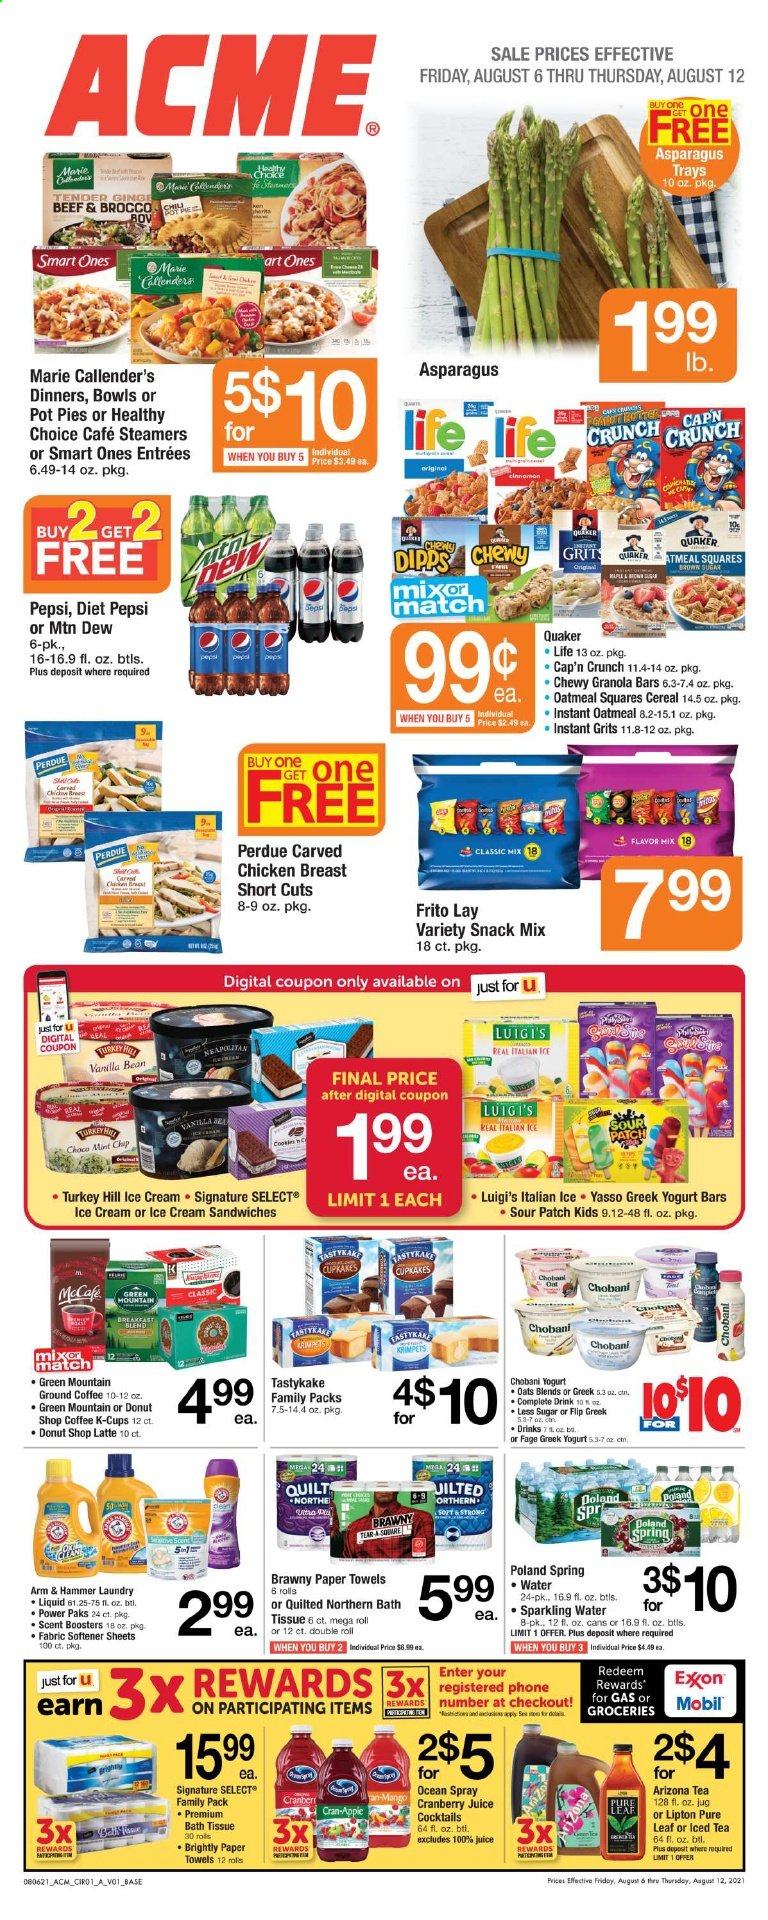 thumbnail - ACME Flyer - 08/06/2021 - 08/12/2021 - Sales products - pot pie, asparagus, sandwich, Quaker, Healthy Choice, Perdue®, Marie Callender's, greek yoghurt, Chobani, ice cream, snack, sour patch, ARM & HAMMER, oatmeal, oats, grits, cereals, granola bar, Cap'n Crunch, cranberry juice, Mountain Dew, Pepsi, juice, Lipton, ice tea, Diet Pepsi, AriZona, sparkling water, Pure Leaf, coffee, ground coffee, coffee capsules, McCafe, K-Cups, Green Mountain, chicken breasts, bath tissue, Quilted Northern, kitchen towels, paper towels, fabric softener, scent booster, quilt. Page 1.